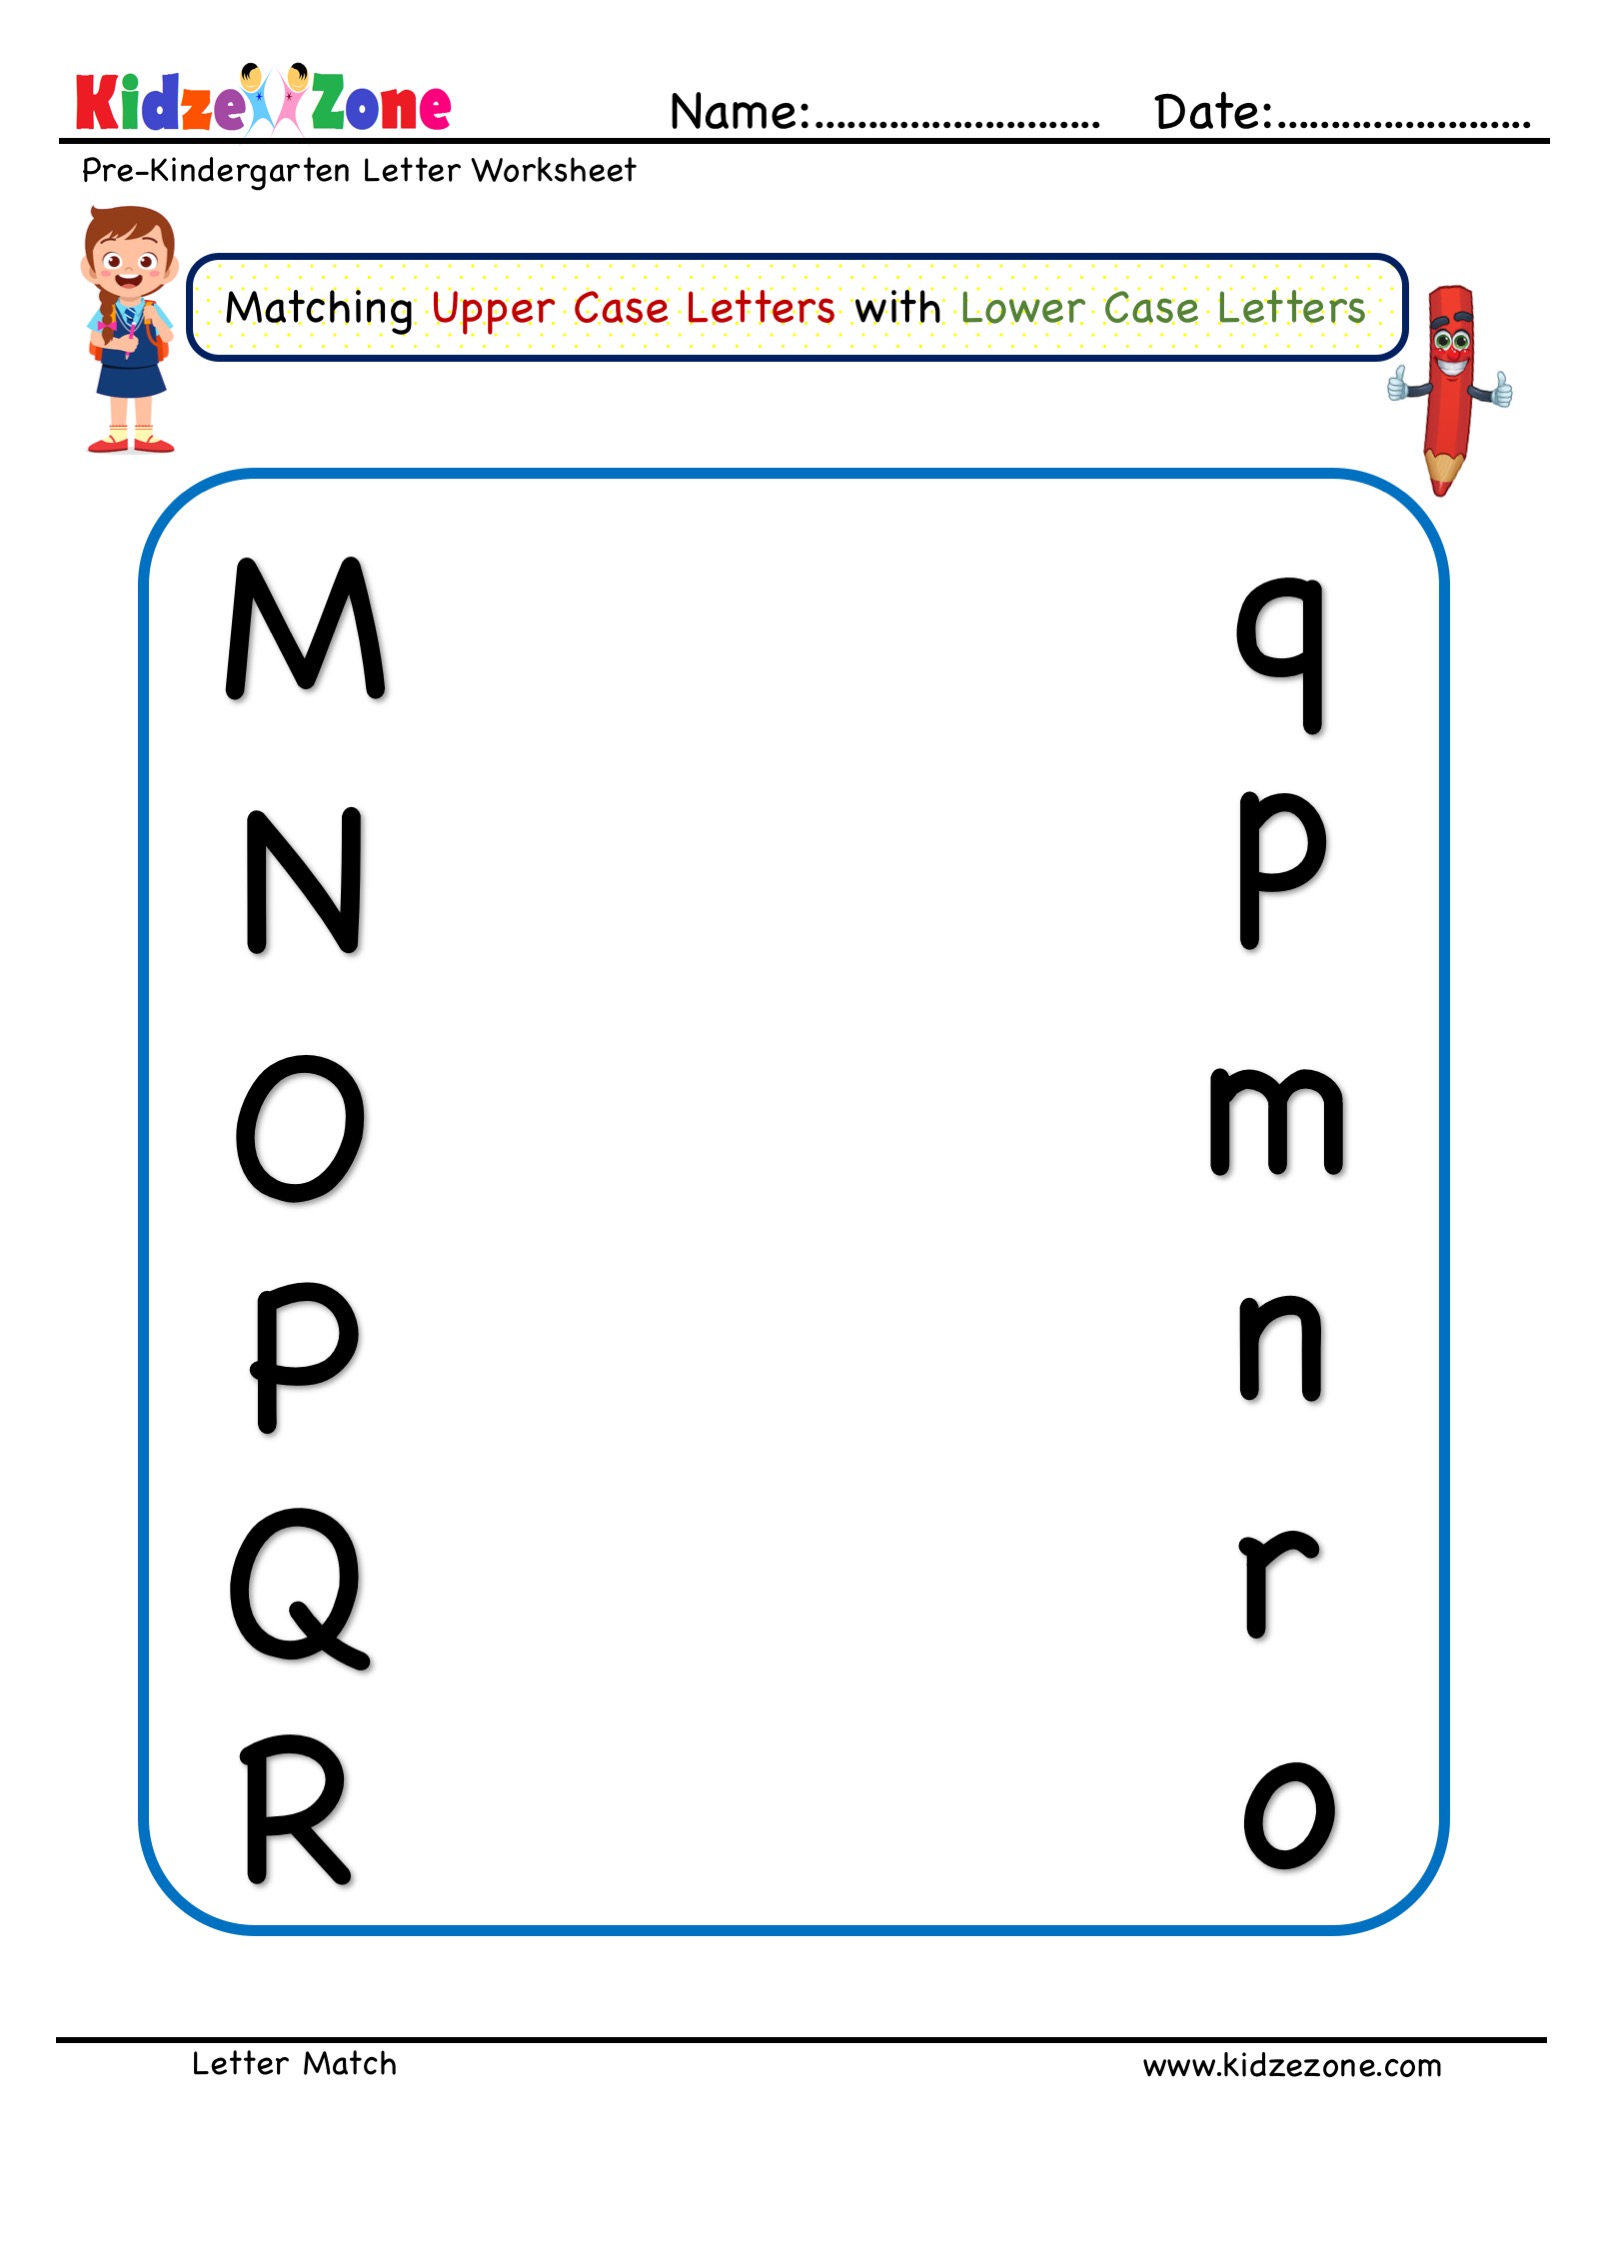 preschool-letter-matching-upper-case-to-lower-case-m-to-r